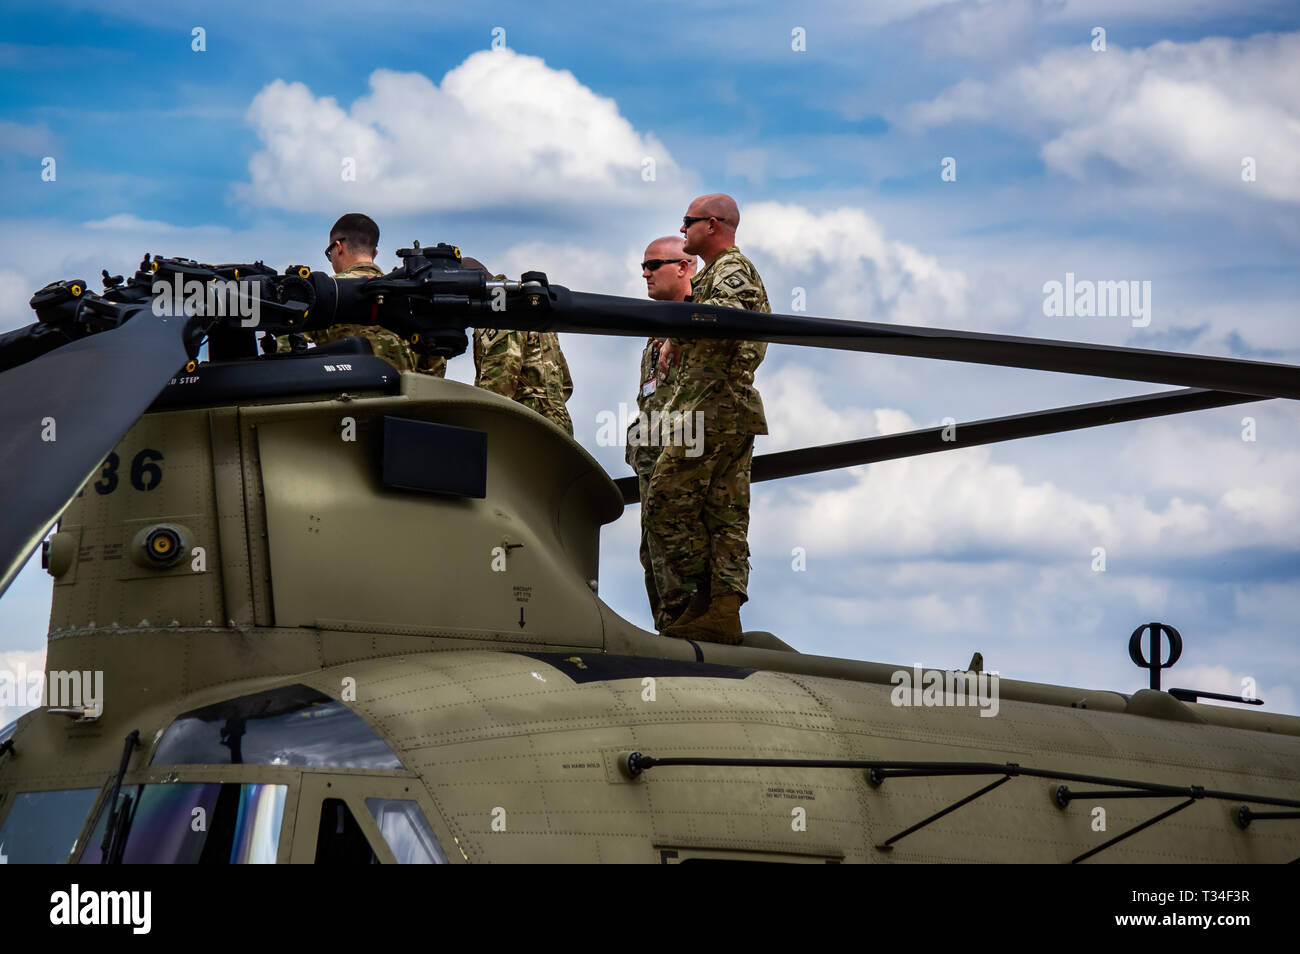 A Boeing Chinook on static display, with the crew on the top watching the air display at the Farnborough air show 2018 Stock Photo